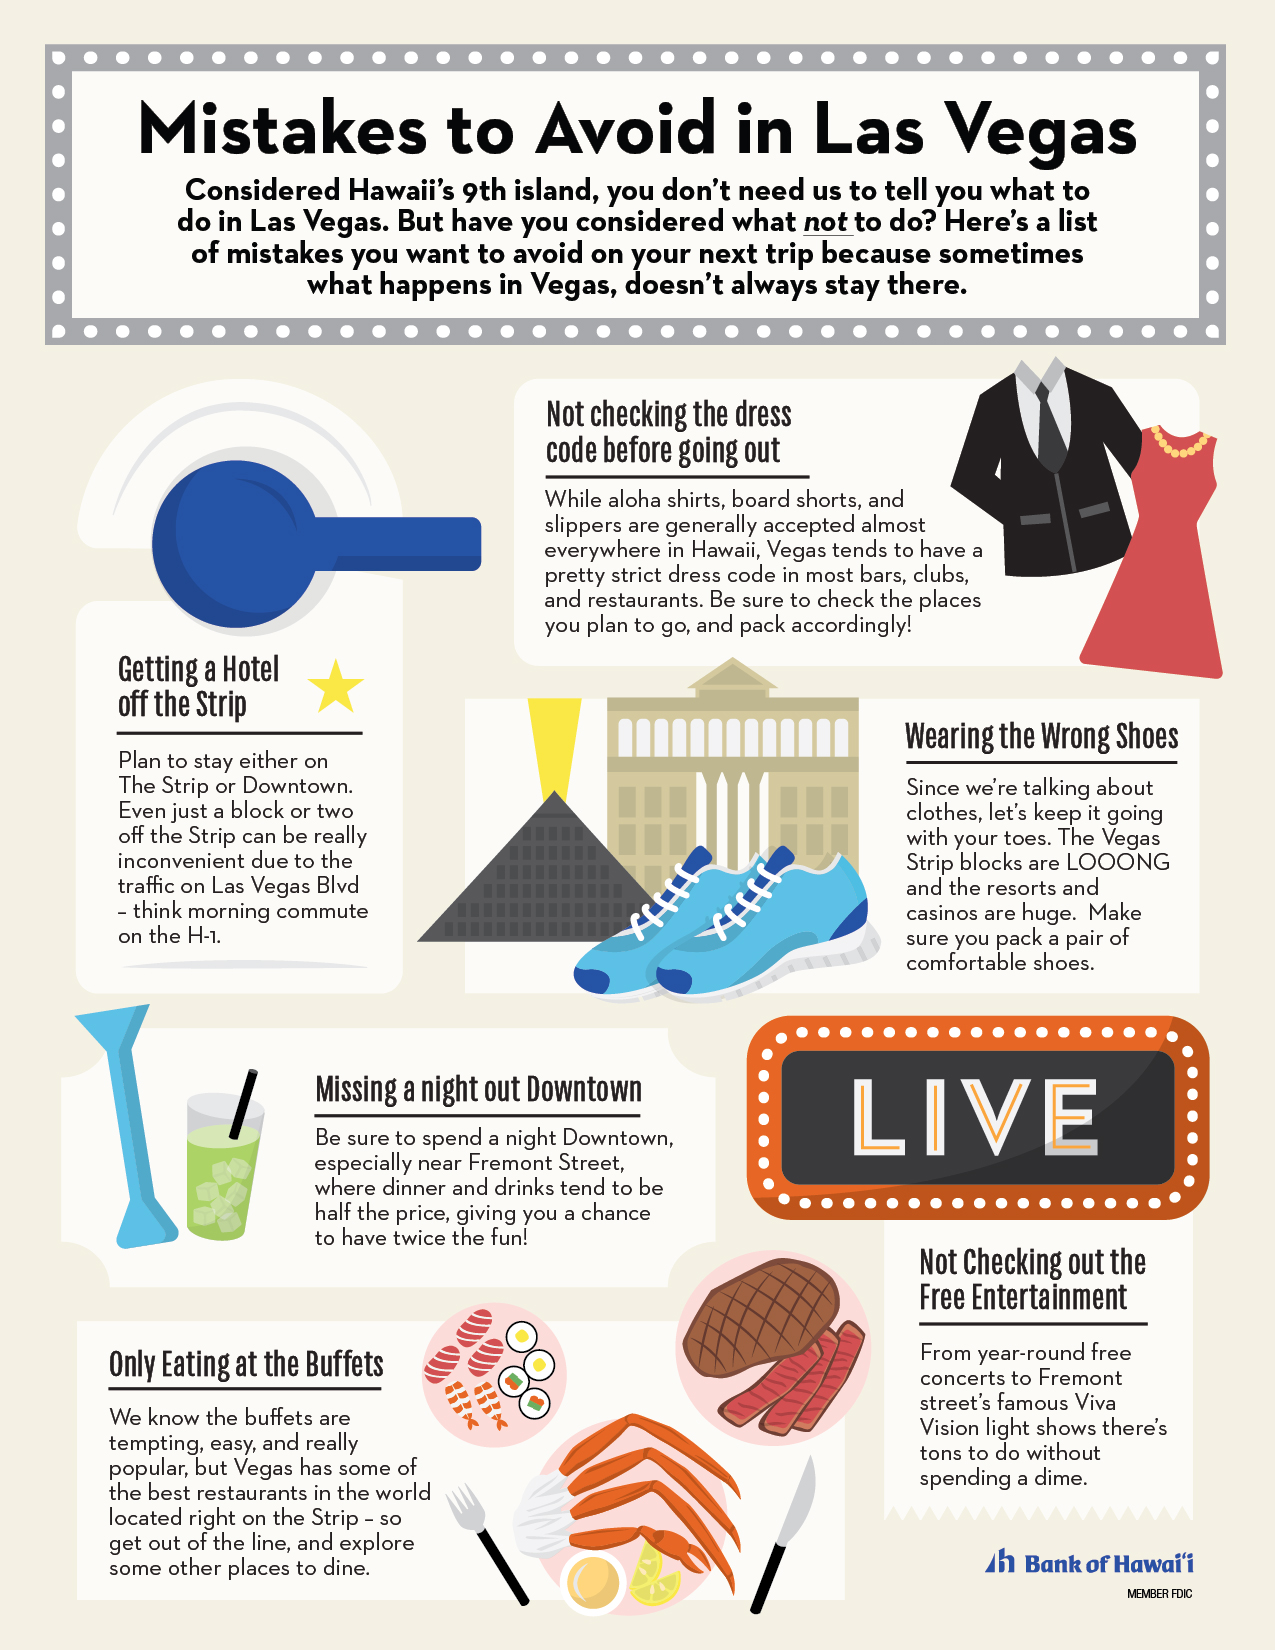 Article-Mistakes-to-Avoid-in-Las-Vegas-infographic.jpg